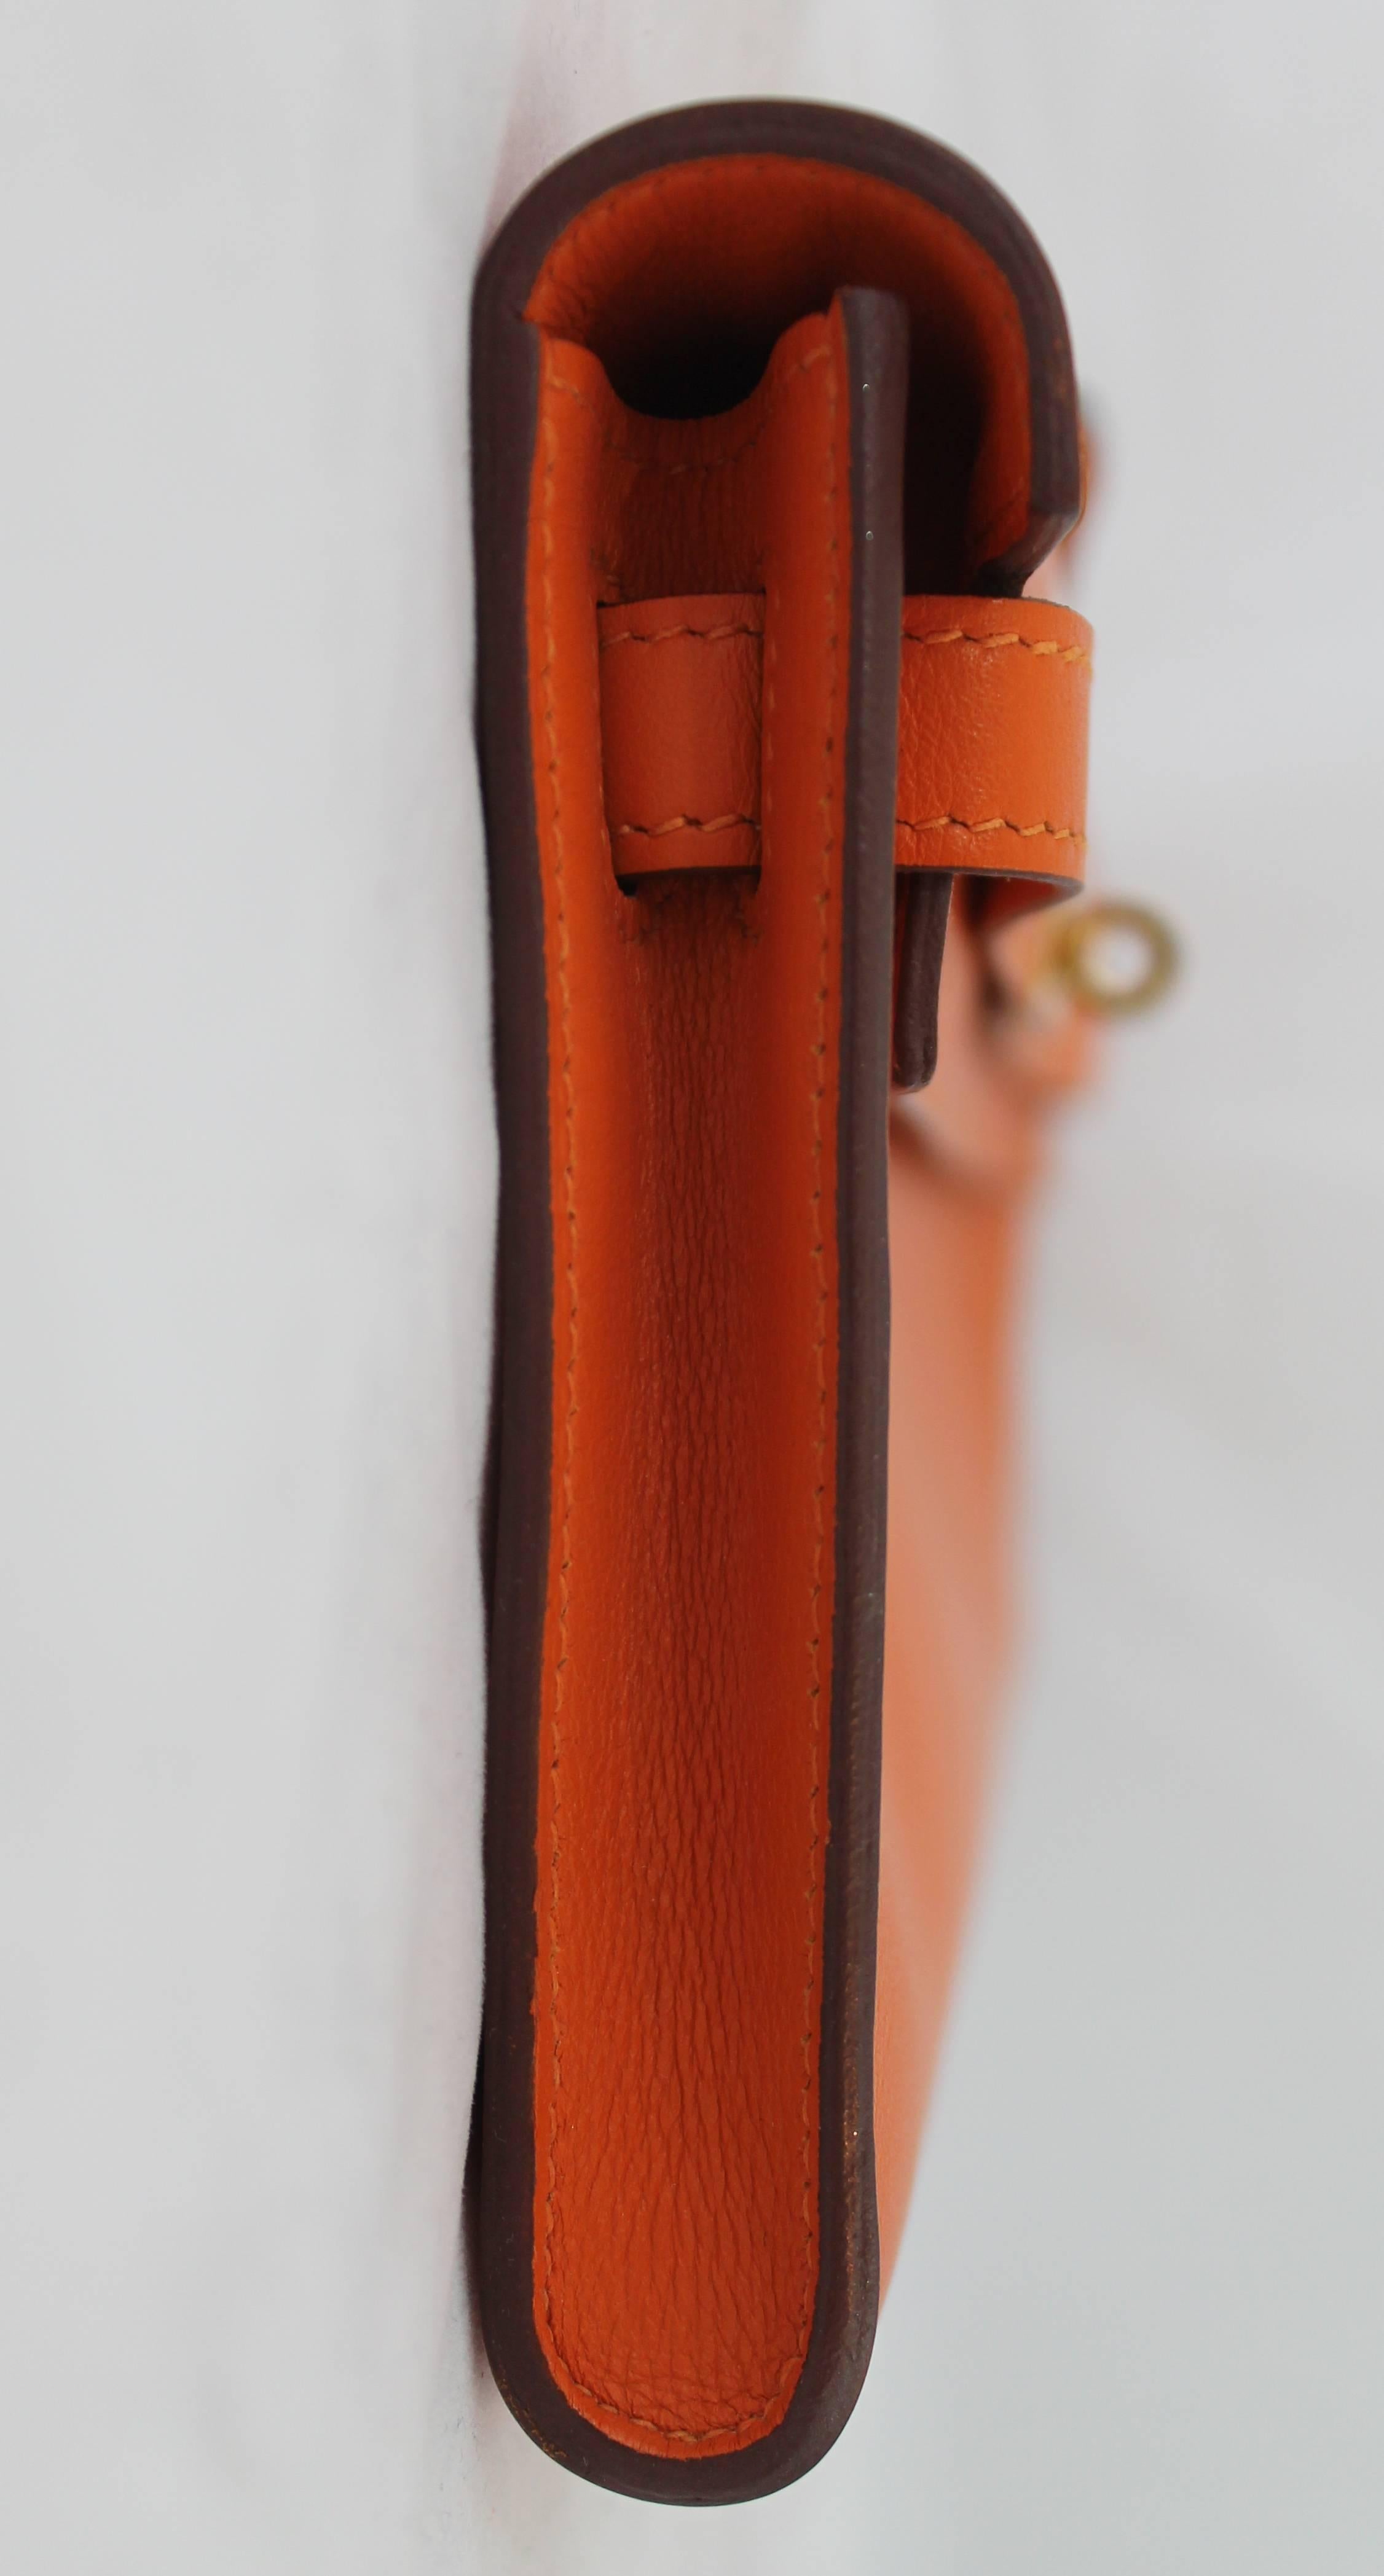 Hermes Orange Chevre de Coromandel 31 cm Kelly Cut - GHW - Q  This beautiful Kelly cut in the infamous Hermes Orange is in excellent condition. It has GHW and comes with Duster and Box. Letter is Q. 
Measurements:
Height 5